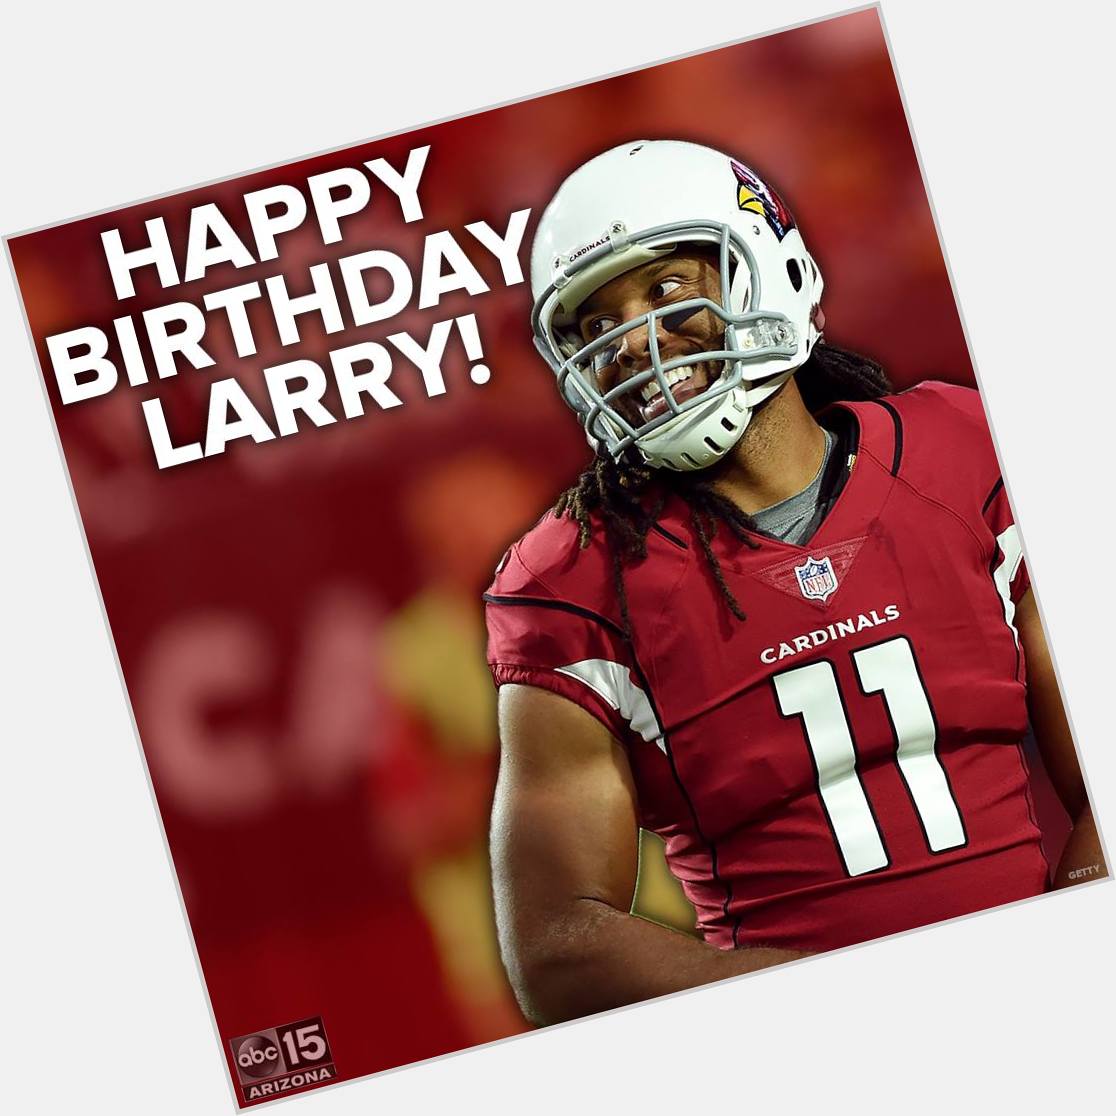 Happy birthday Larry Fitzgerald! The wide receiver turns 36 today 